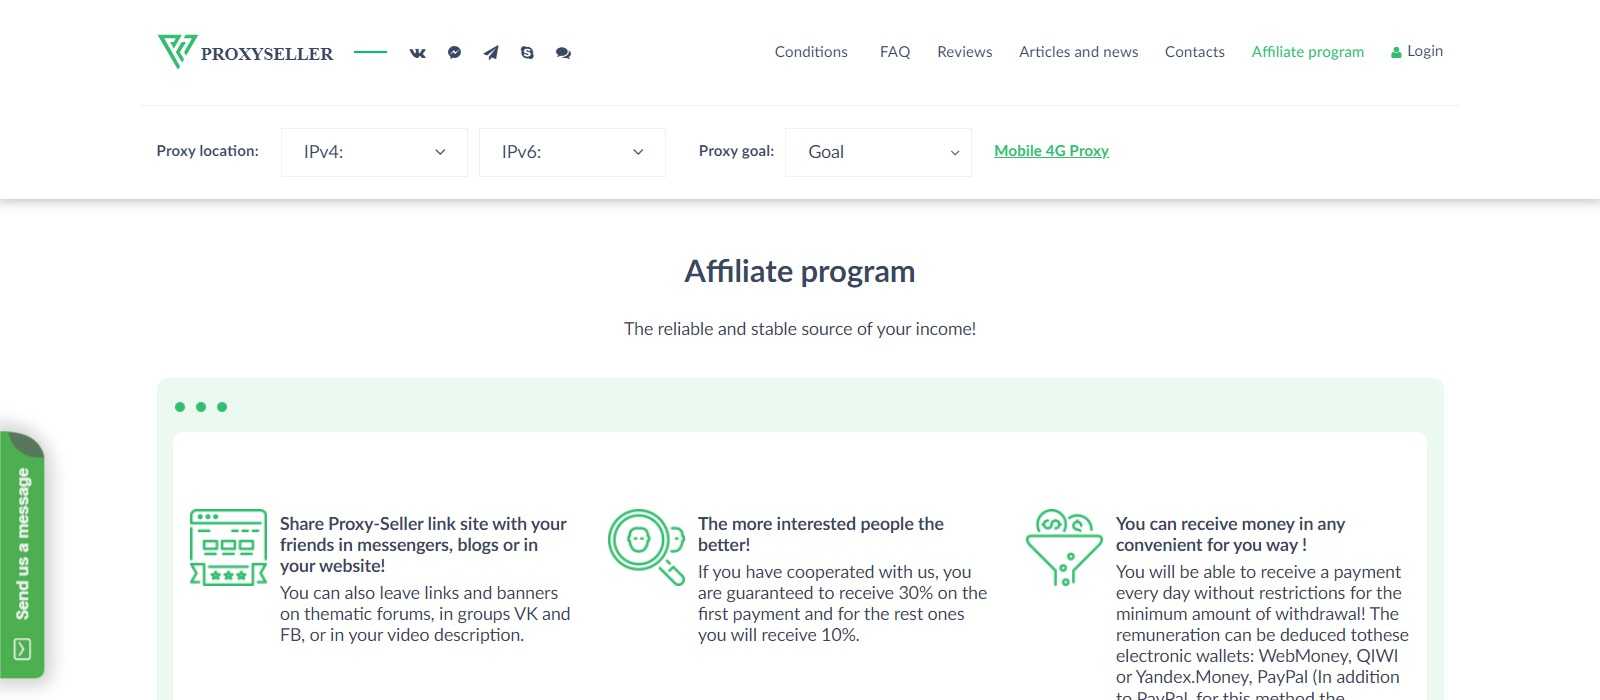 Proxy-Seller Affiliates Program Review: Get Earn 30% Recurring Commission 